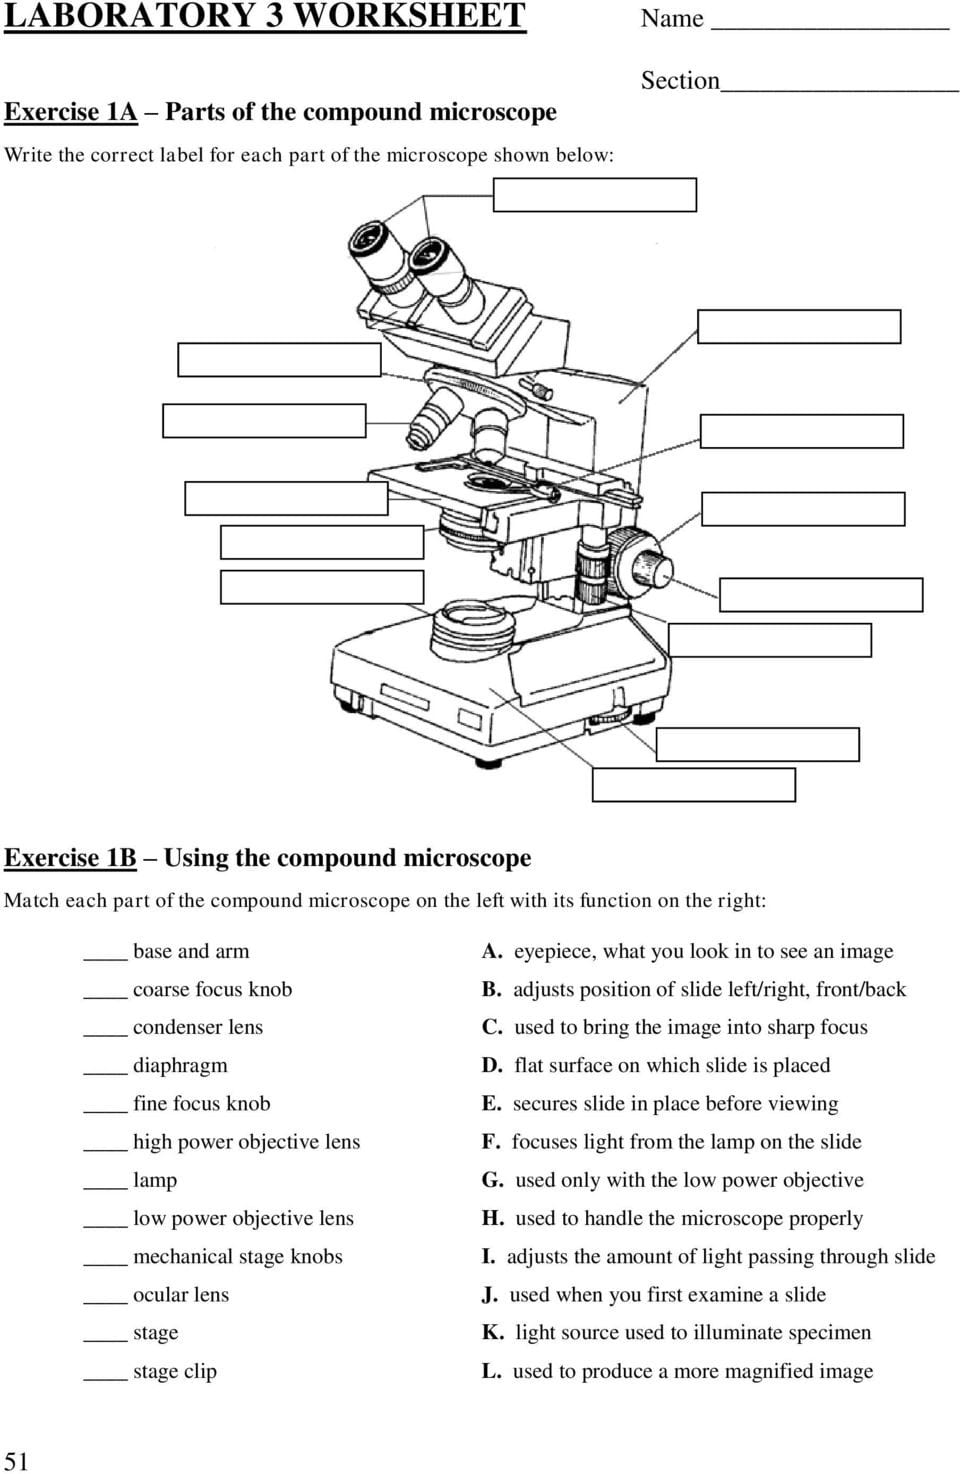 parts-of-microscope-worksheet